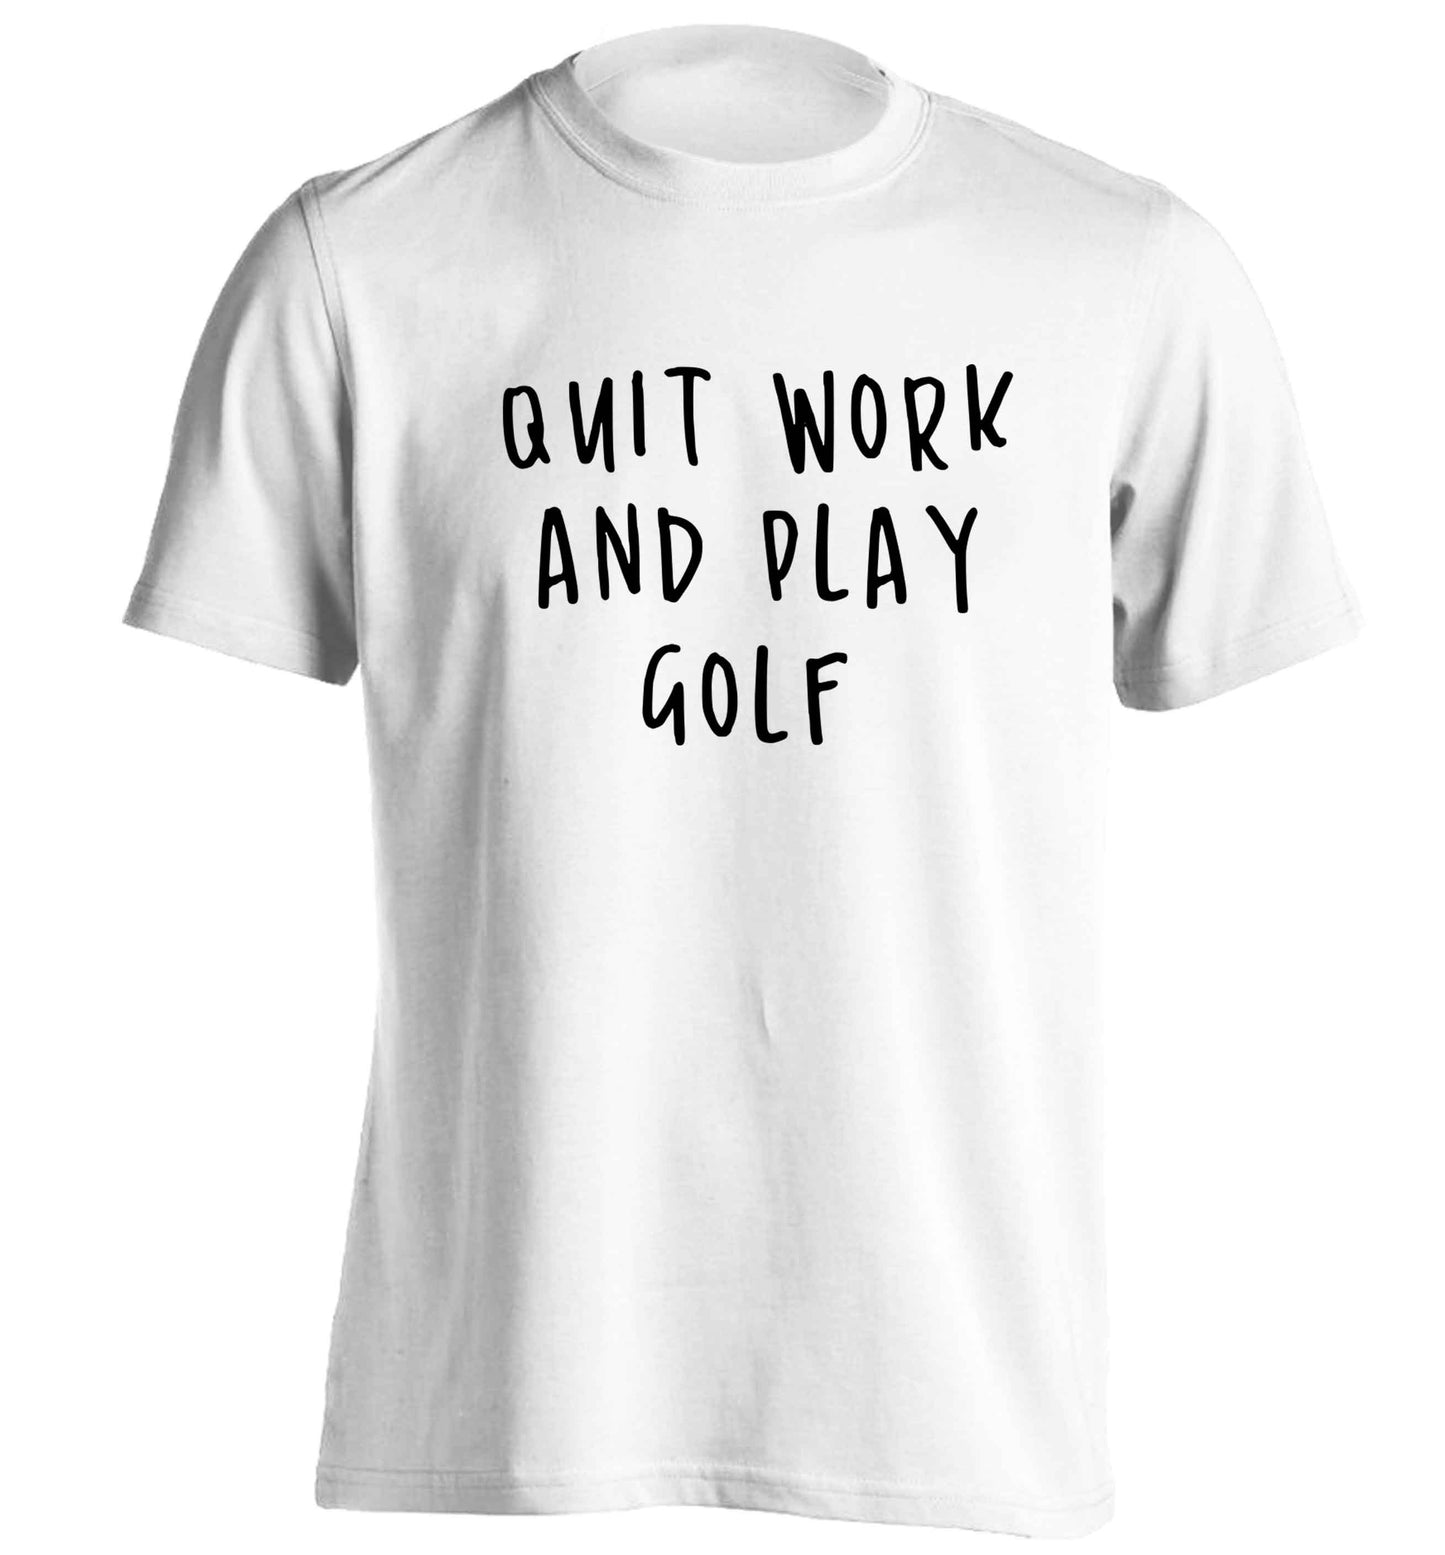 Quit work and play golf adults unisex white Tshirt 2XL